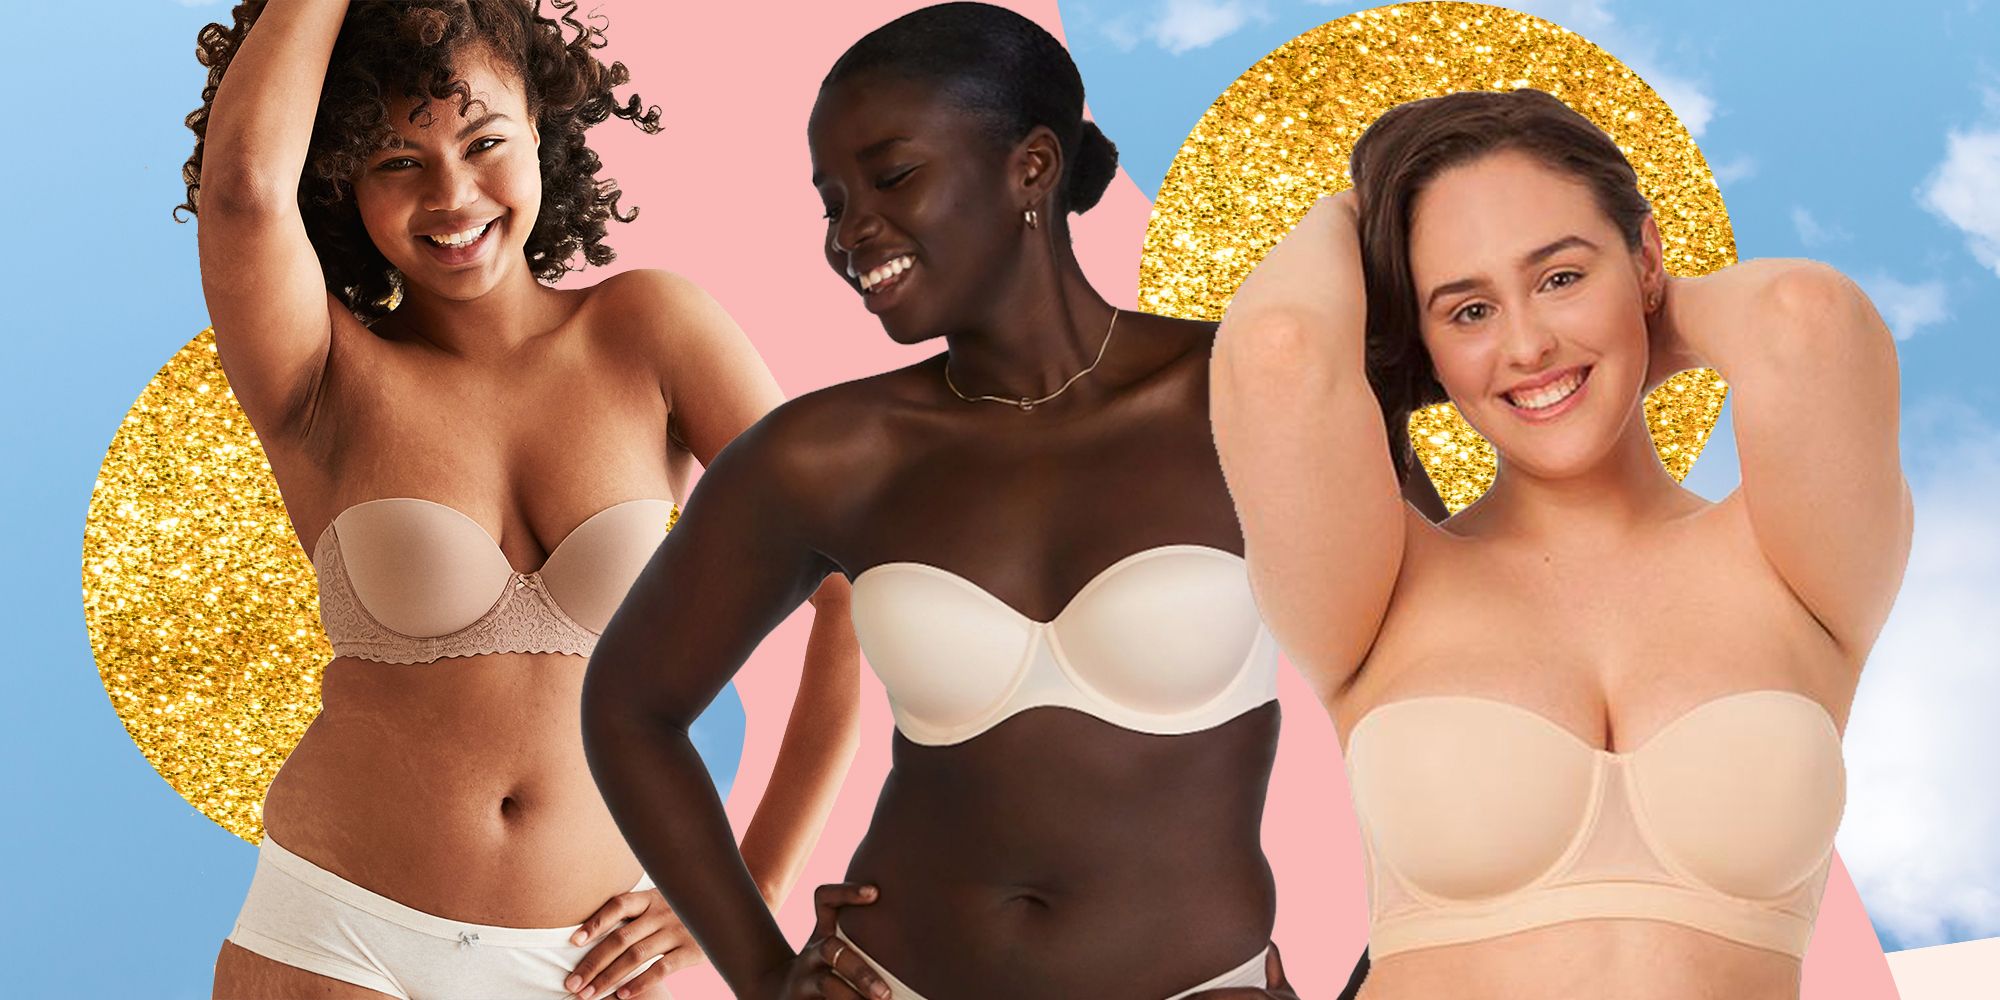 Flat Chested Tiny Teen - 11 Best Strapless Bras 2019 â€” Strapless Bra for Every Shape